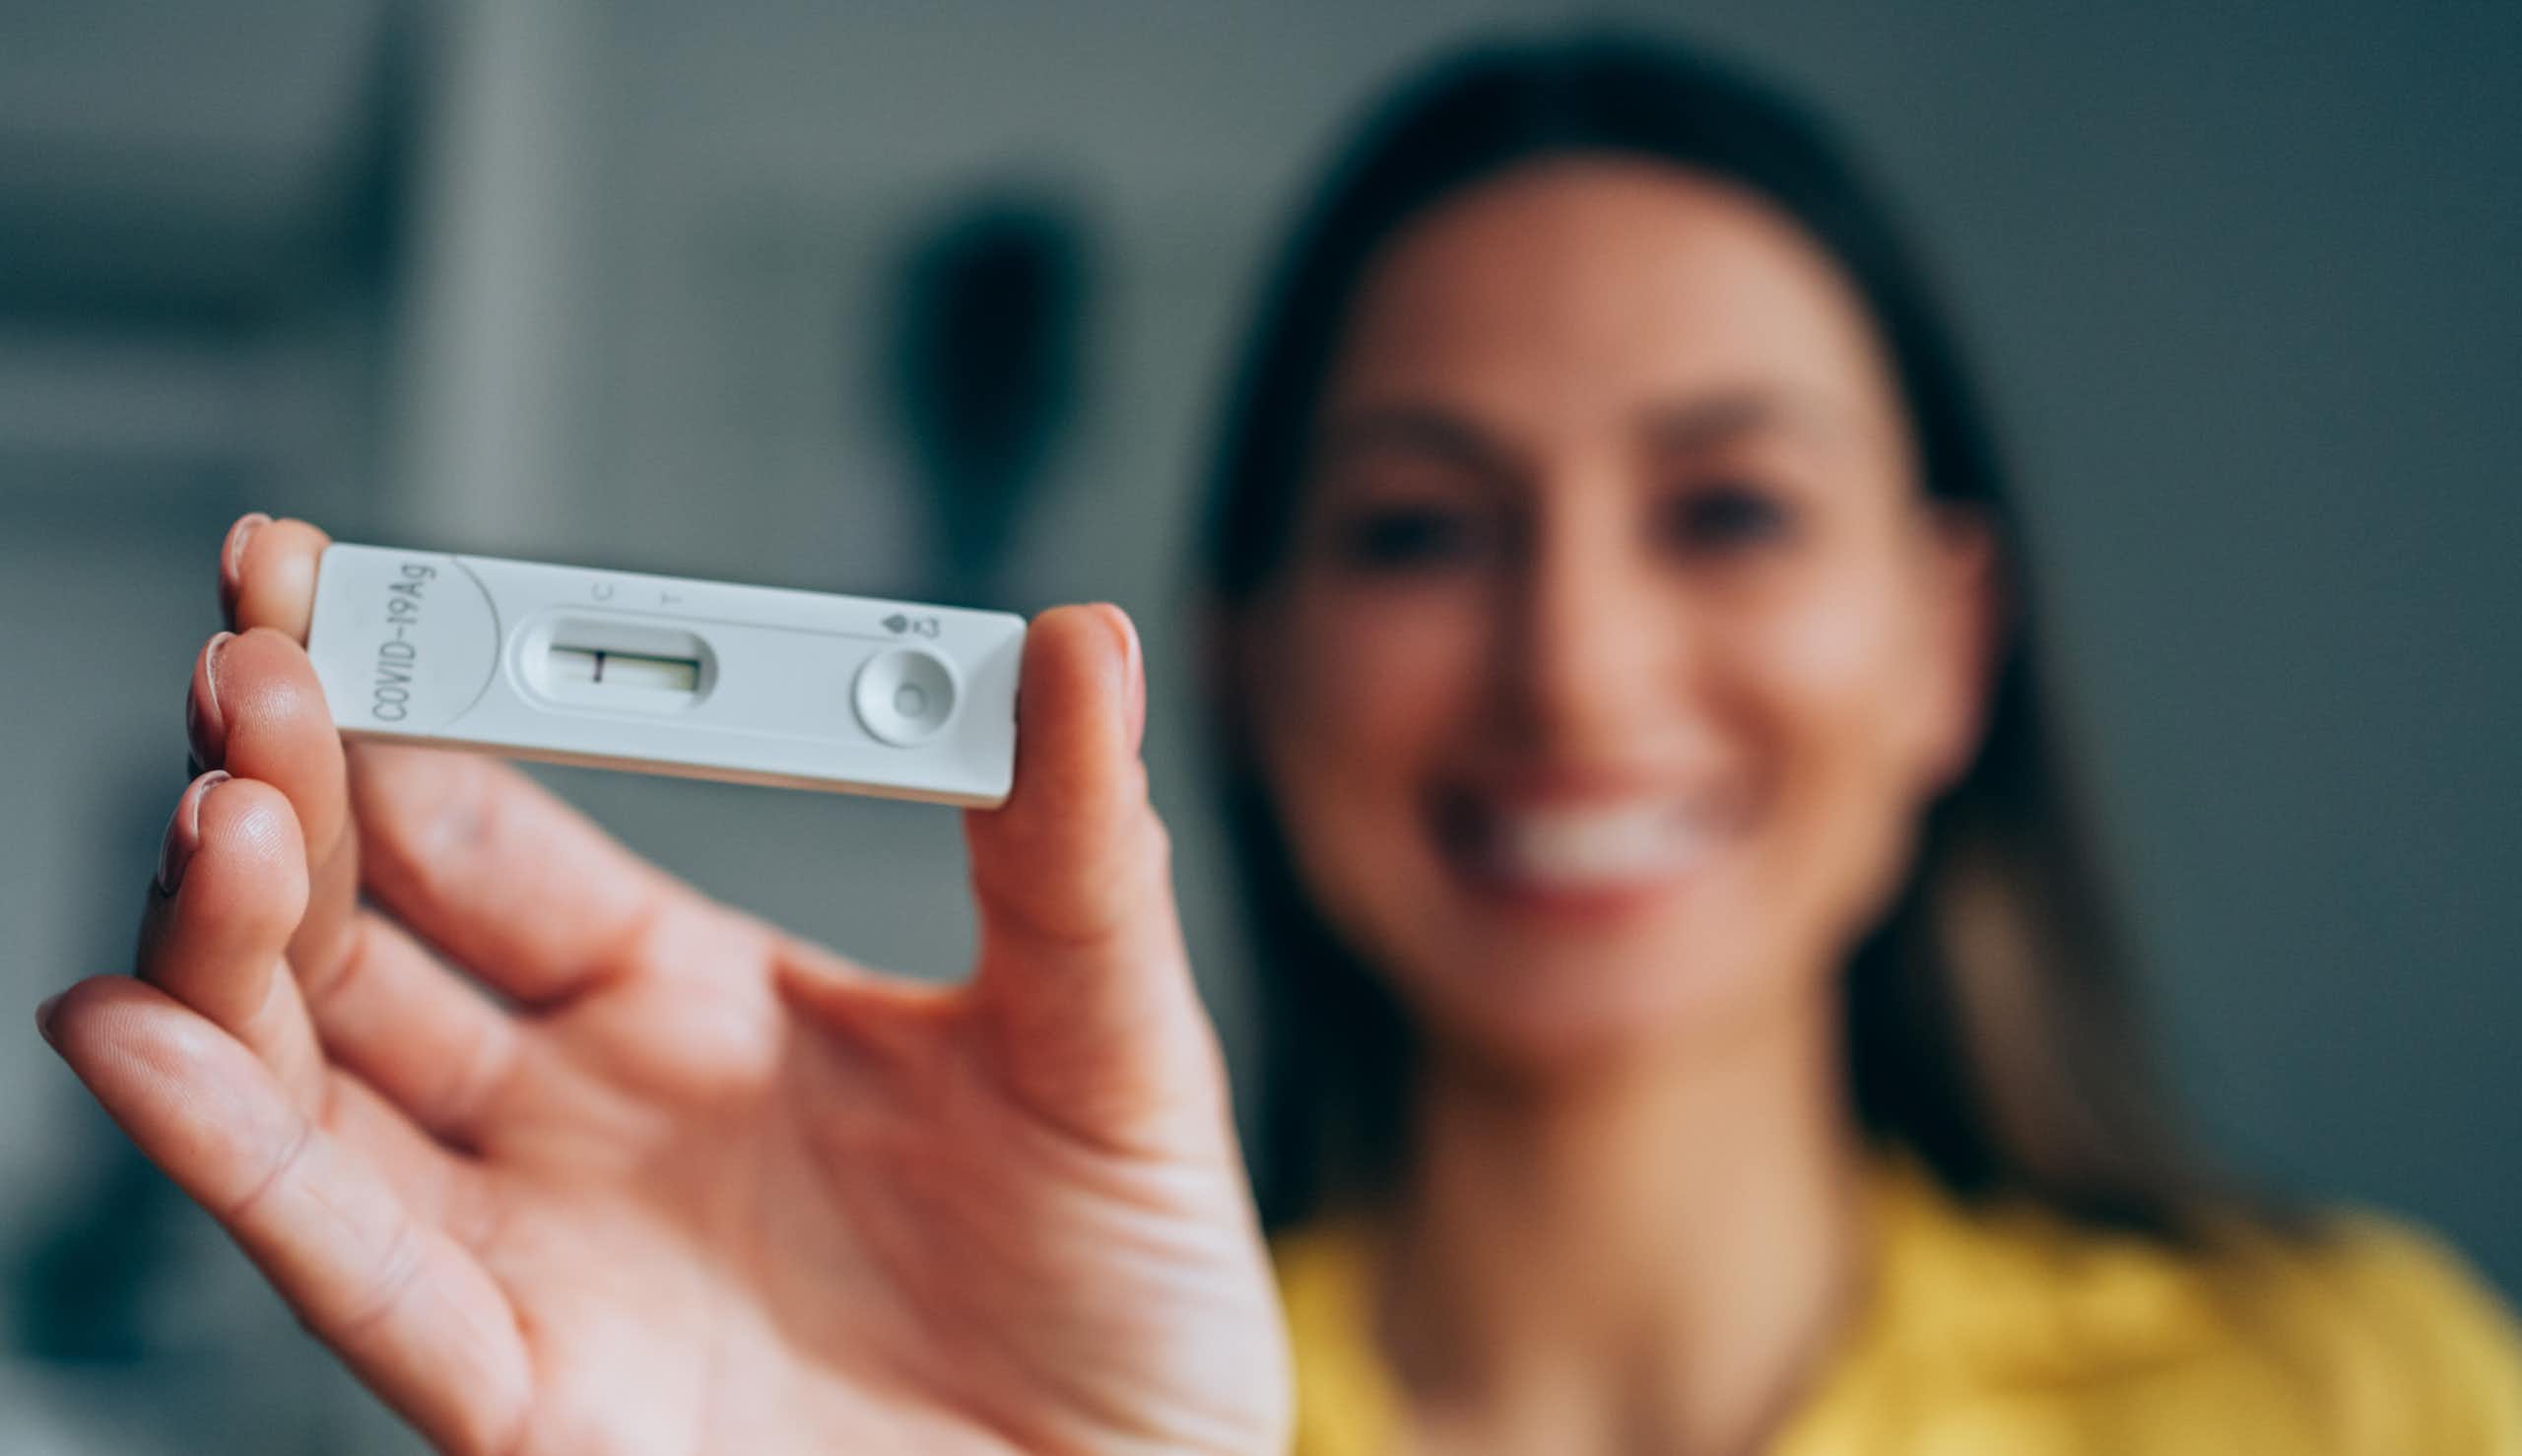 A smiling woman, holding a rapid home test device, shows her negative results.